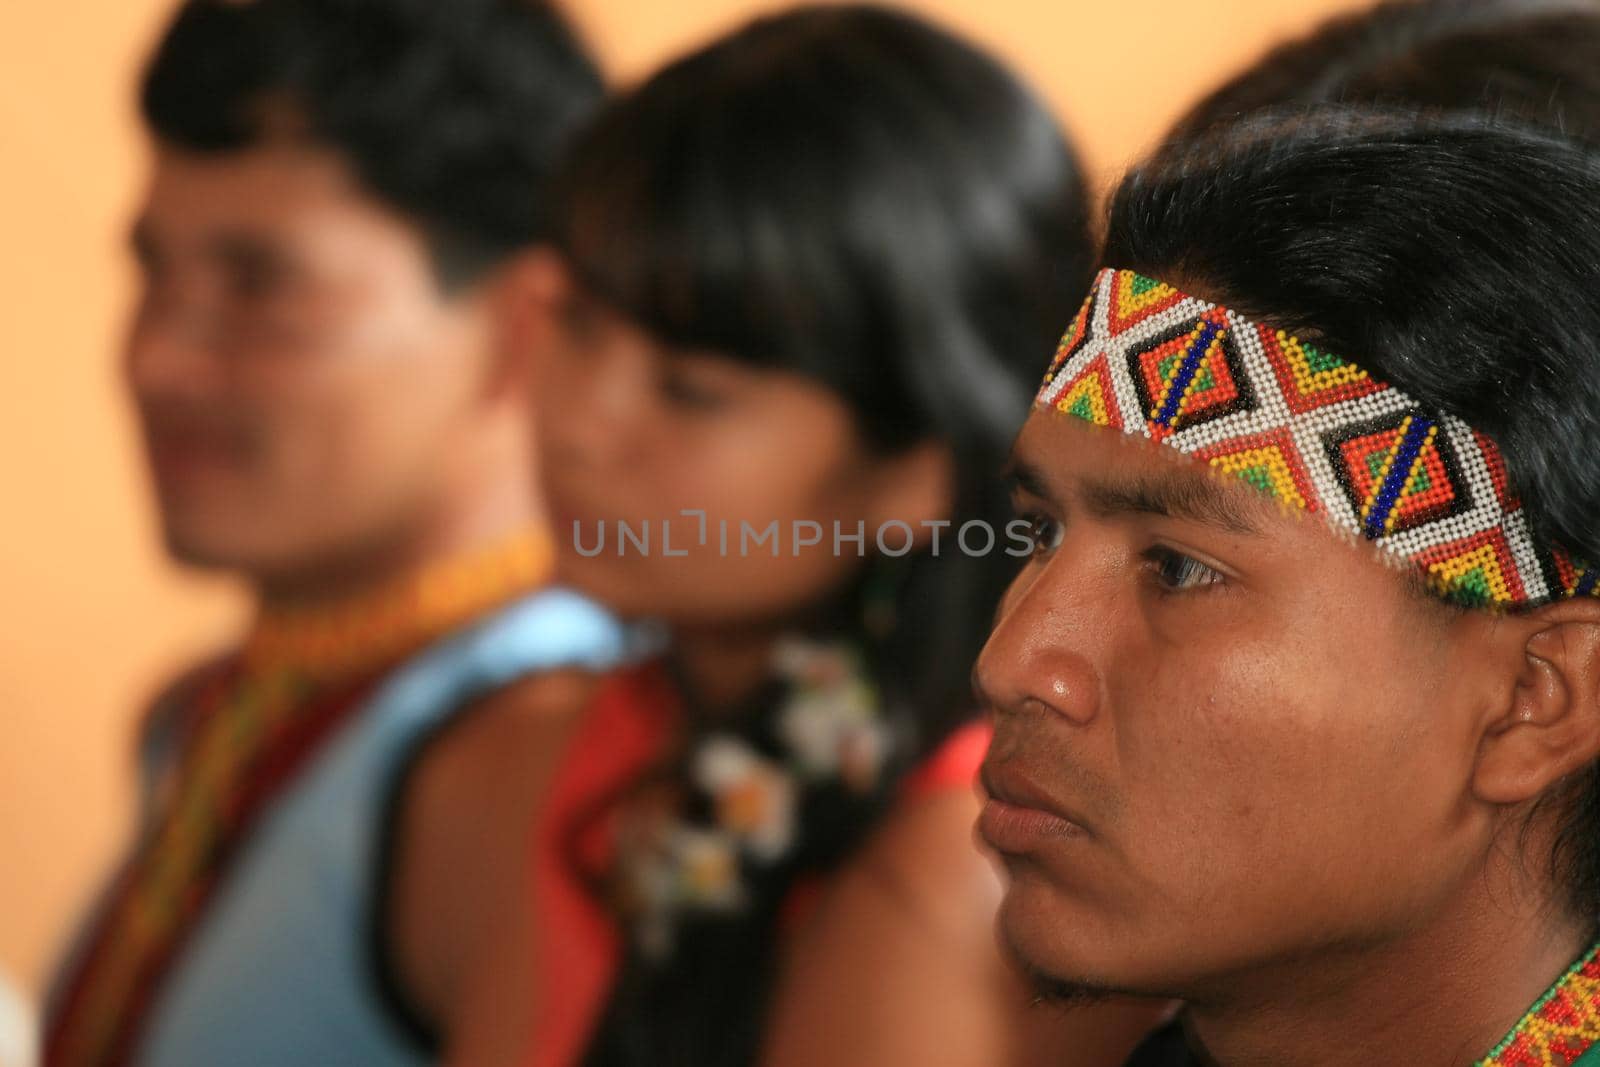 salvador, bahia / brazil - august 4, 2008: Pataxo Indians are seen in the village of Jaqueira in the city of Porto Seguro.